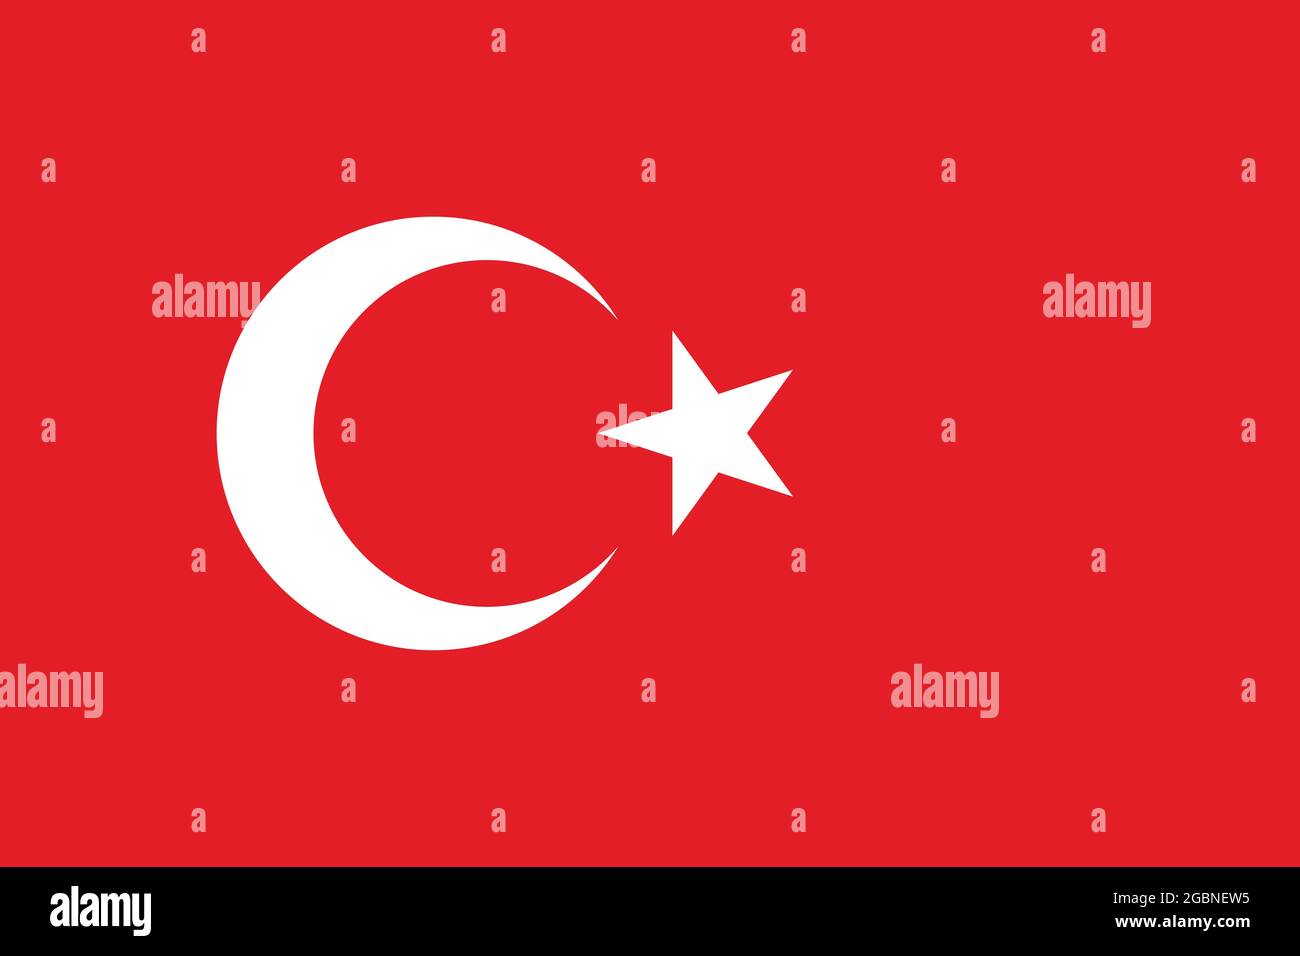 National flag of Turkey original size and colors vector illustration, Turkish flags featuring star and crescent, al bayrak or as al sancak in Turkish Stock Vector